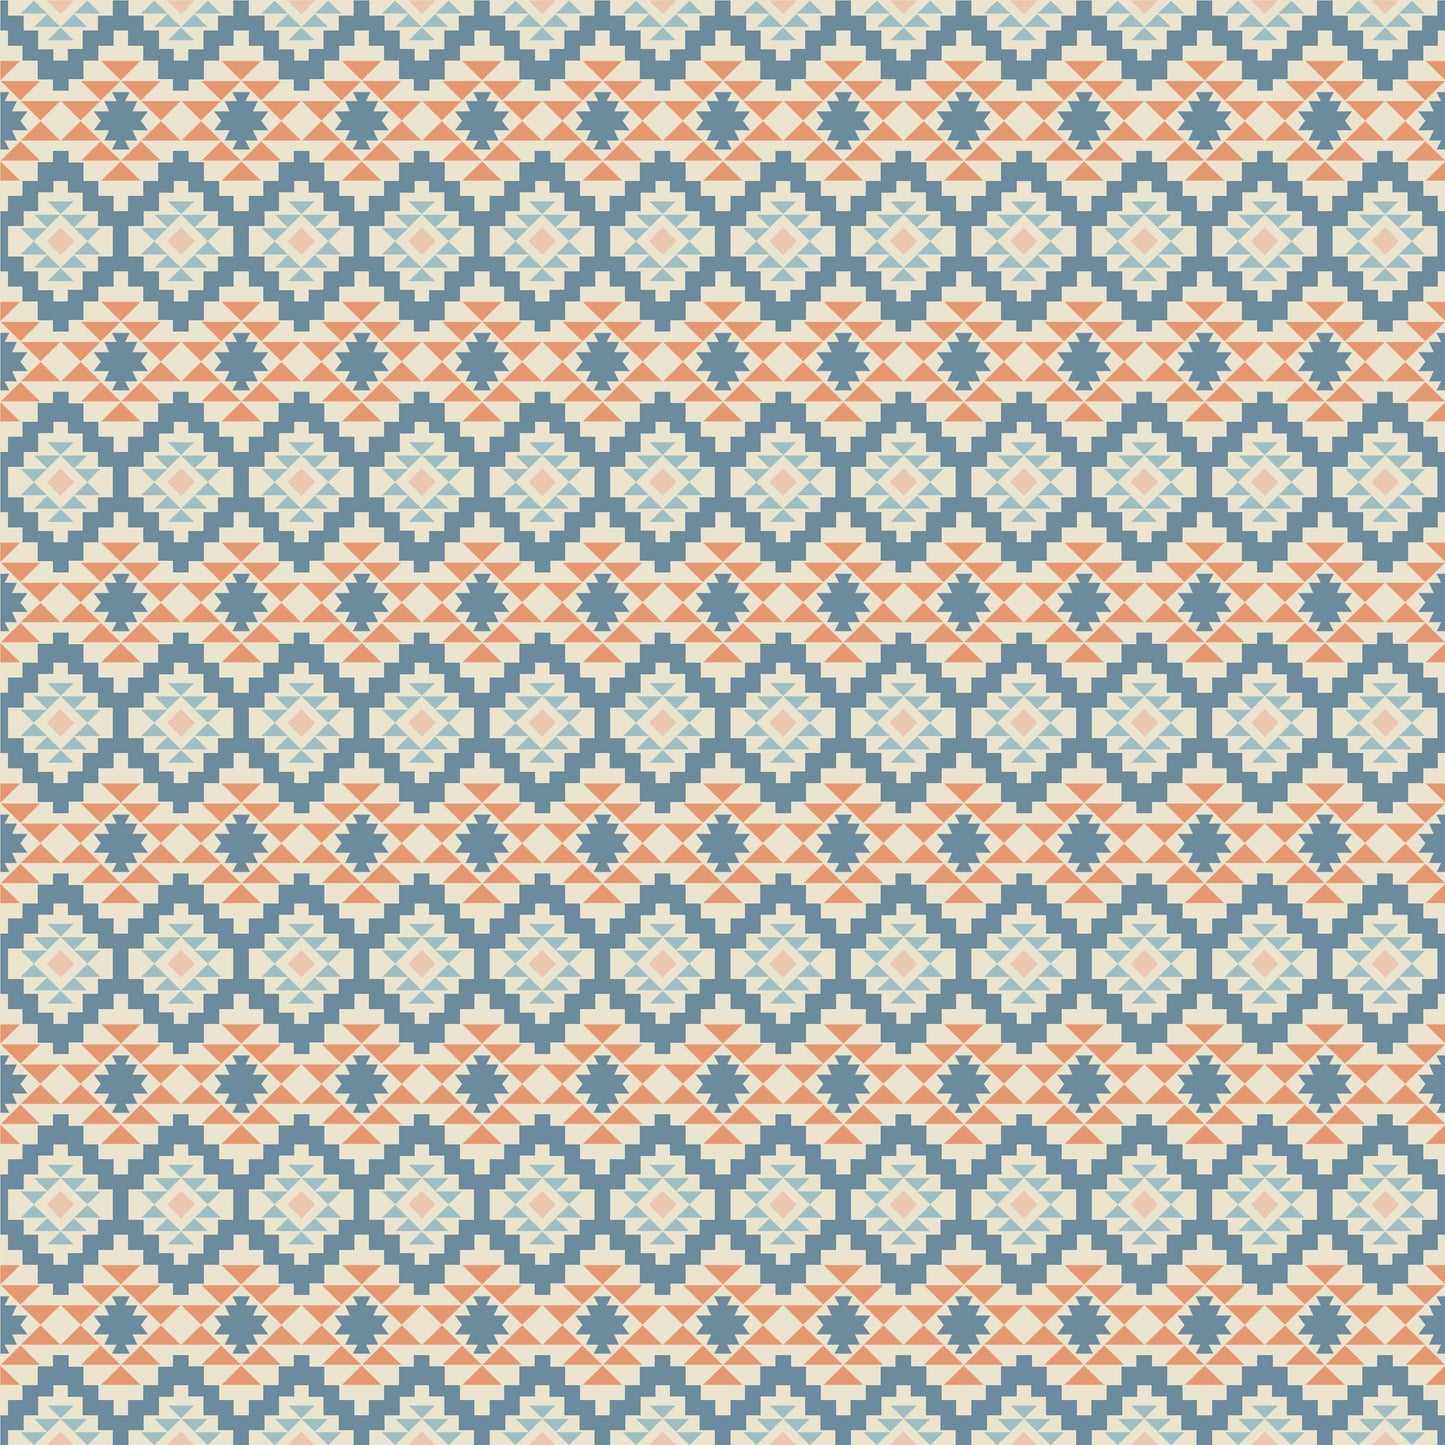 The Aztec Twilight pattern from HowdyHo showcases a vibrant and detailed Aztec-inspired print. The repeating geometric shapes in cool shades of blue are accented with warm orange touches, creating a visually striking design that evokes the beauty of twilight skies. This fabric design is perfect for adding a pop of color and cultural flair to any fashion collection.